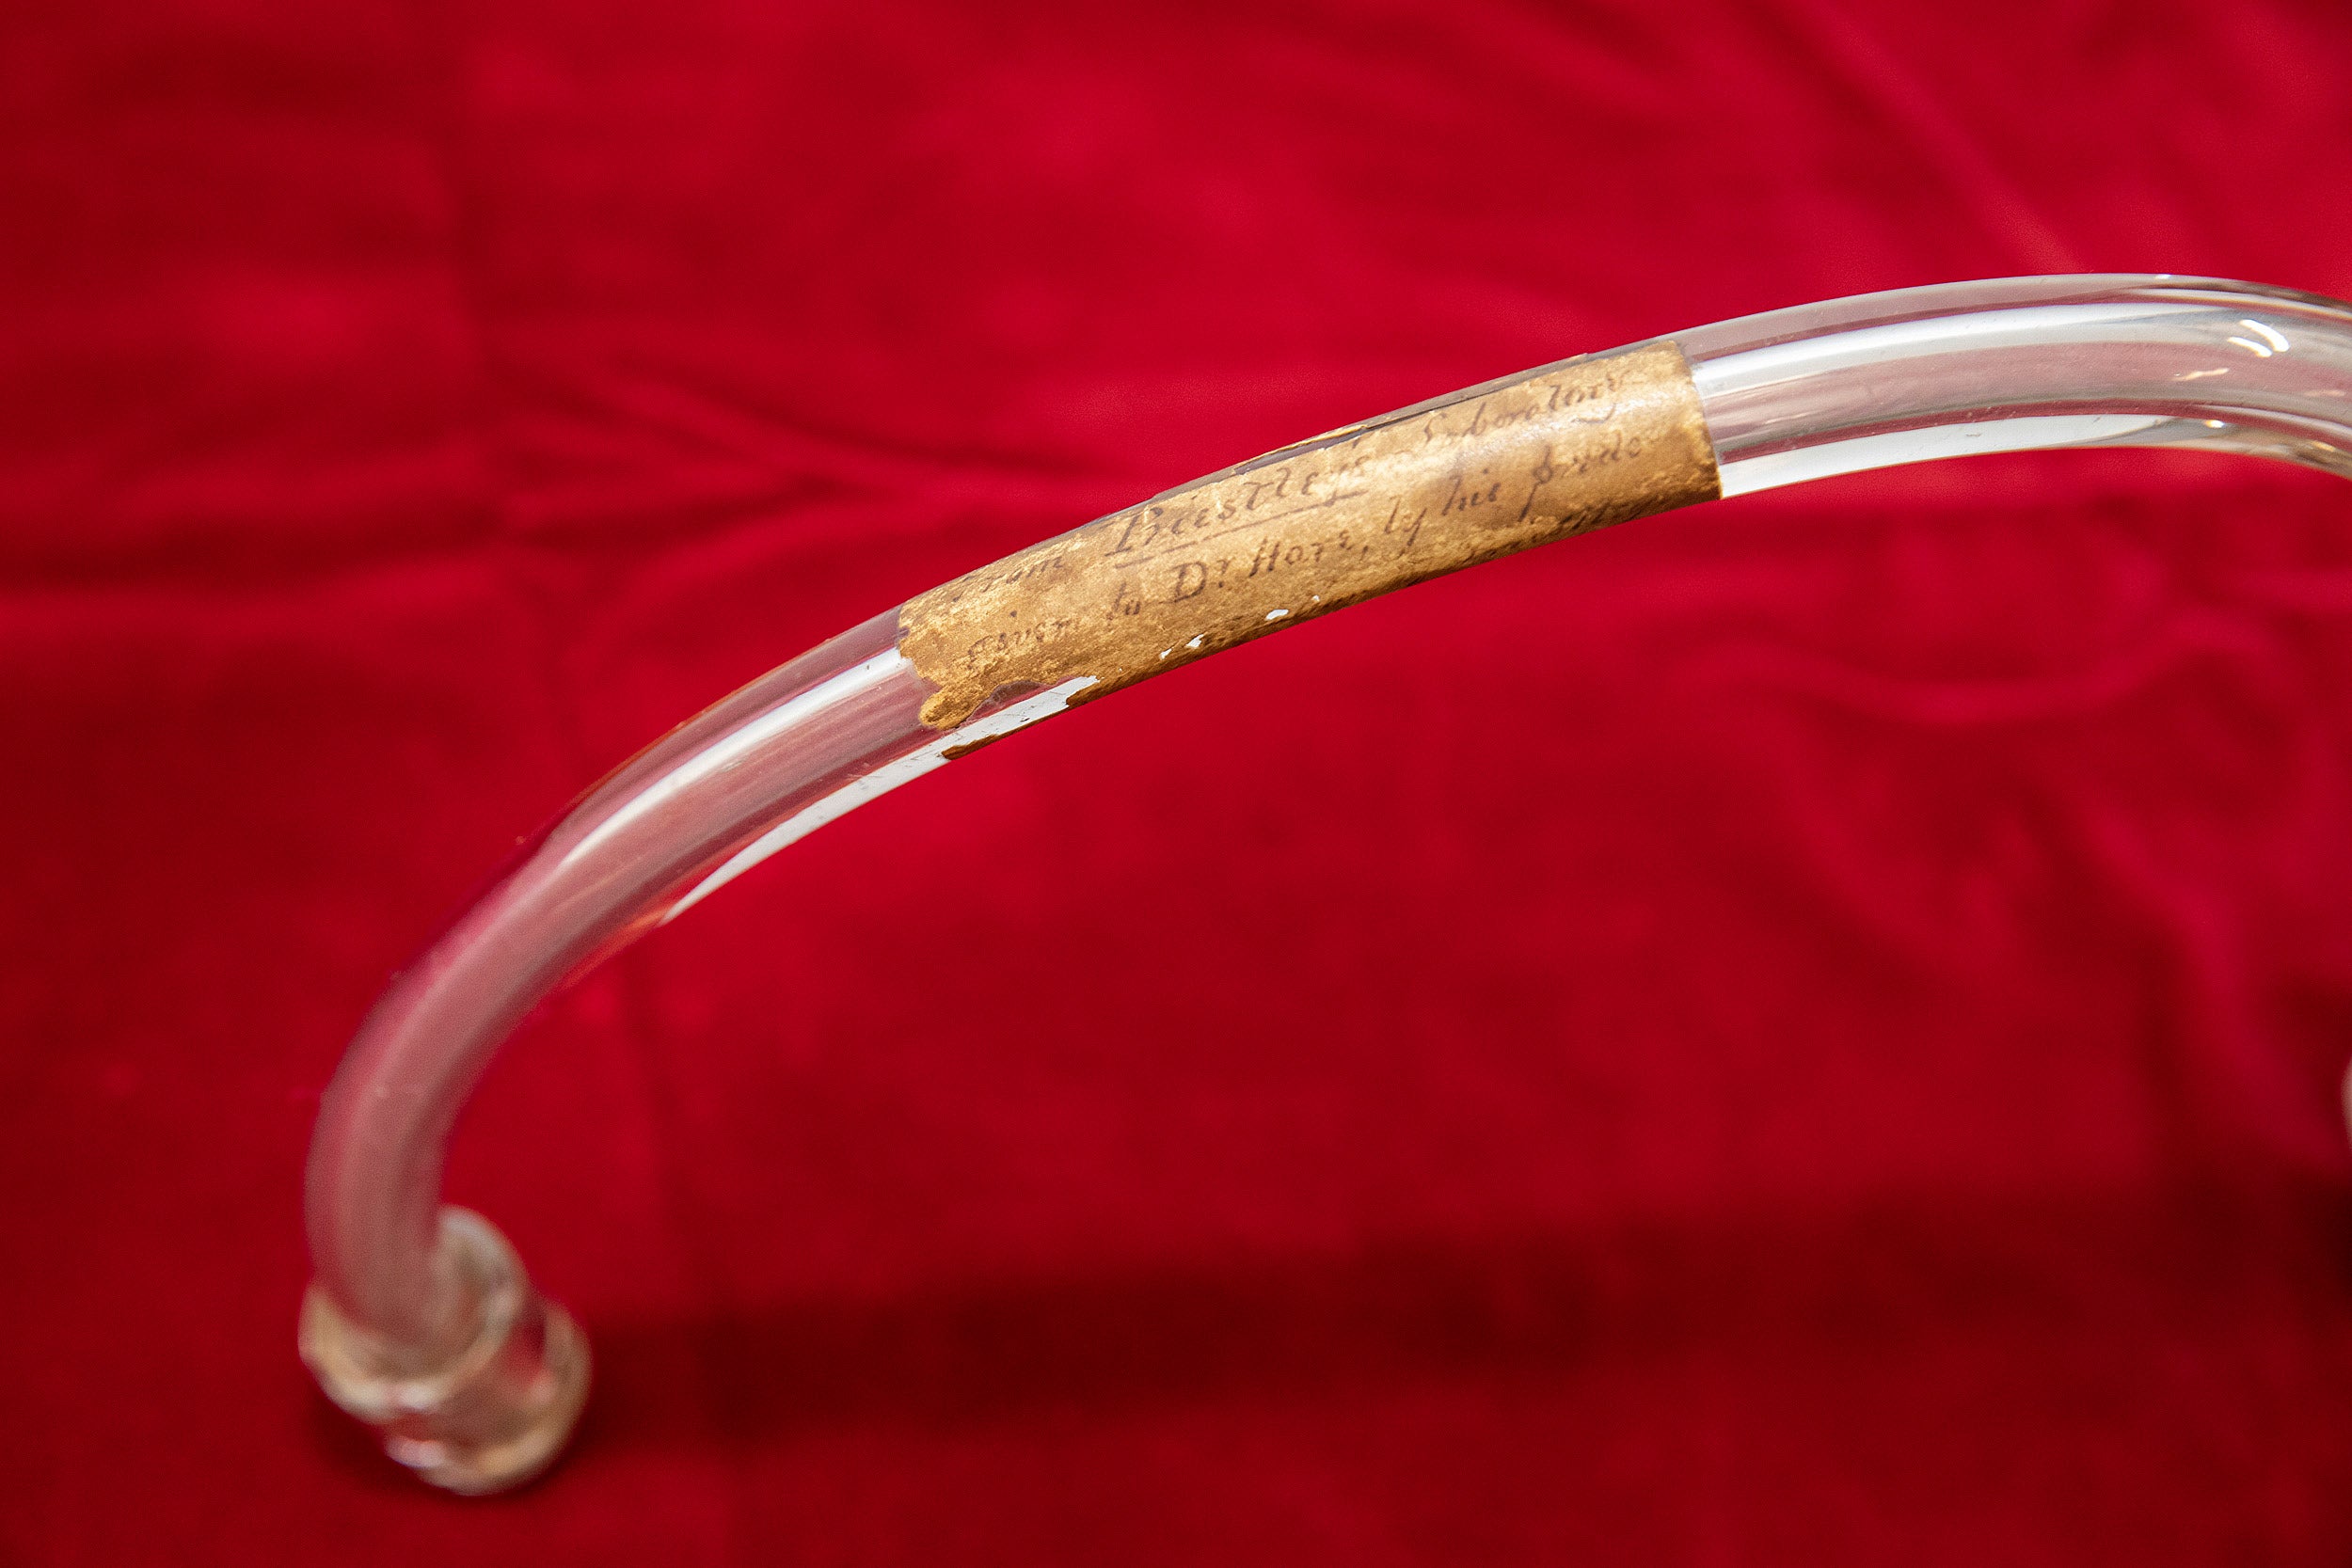 8. This thick glass tube is a treasured relic of the great English chemist, Joseph Priestley